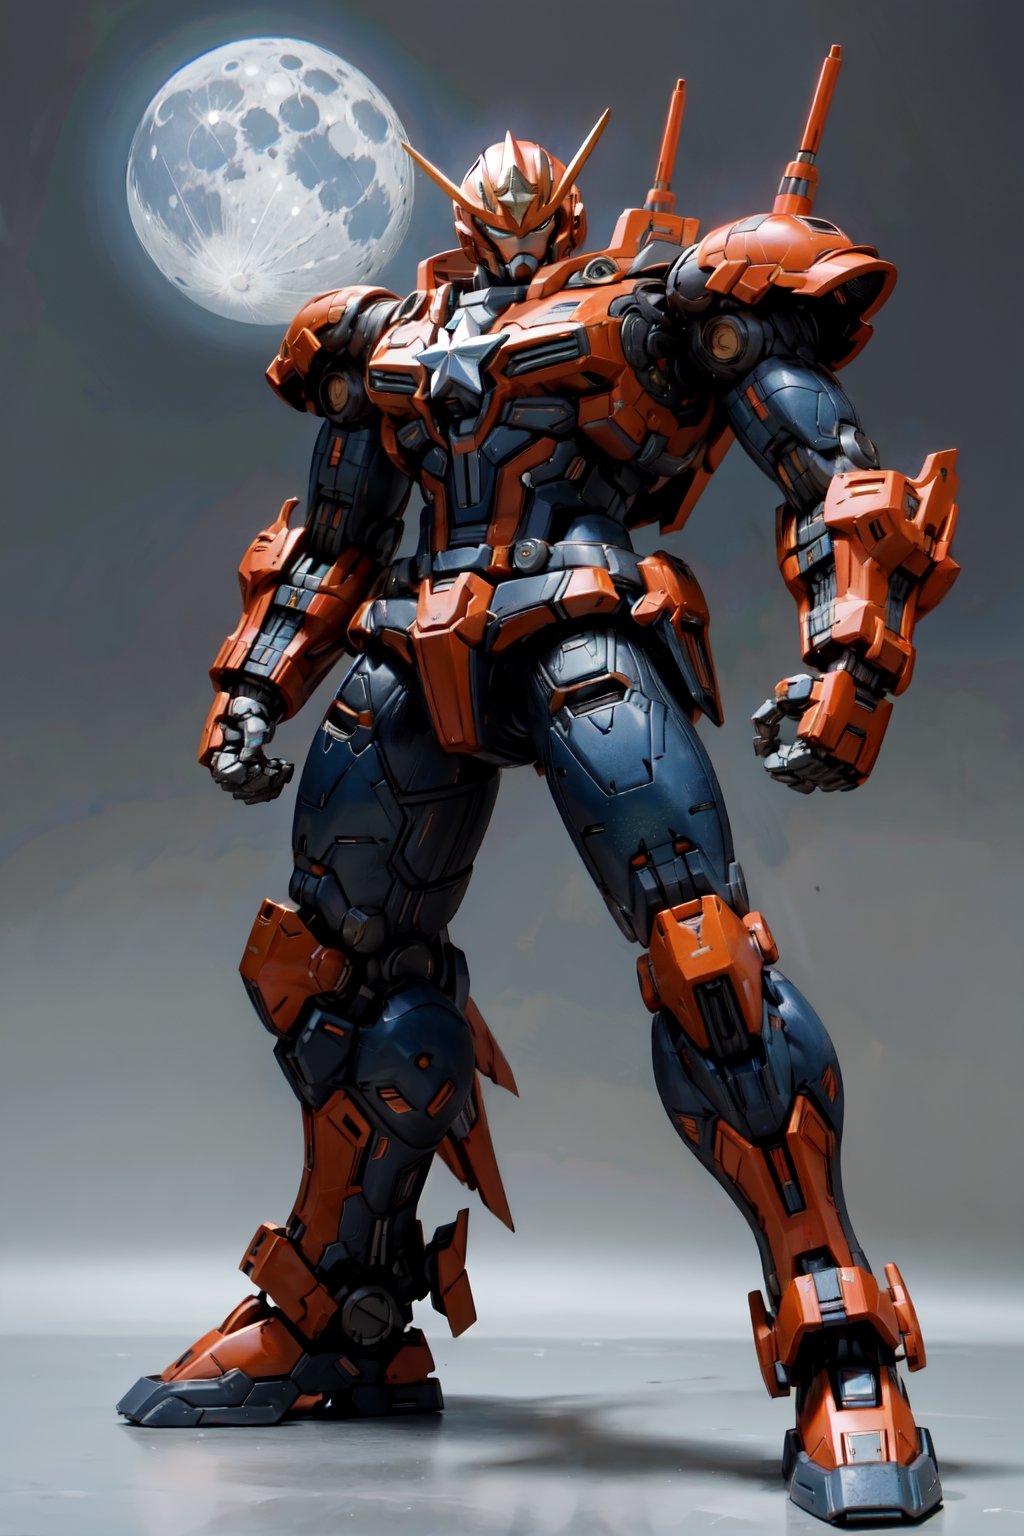 Mech solo, captain marvel colorway, standing, full body, grey background, no humans, robots in background, mecha, clenched hands, science fiction, looking ahead hero stance, nighttime scene full_moon, 